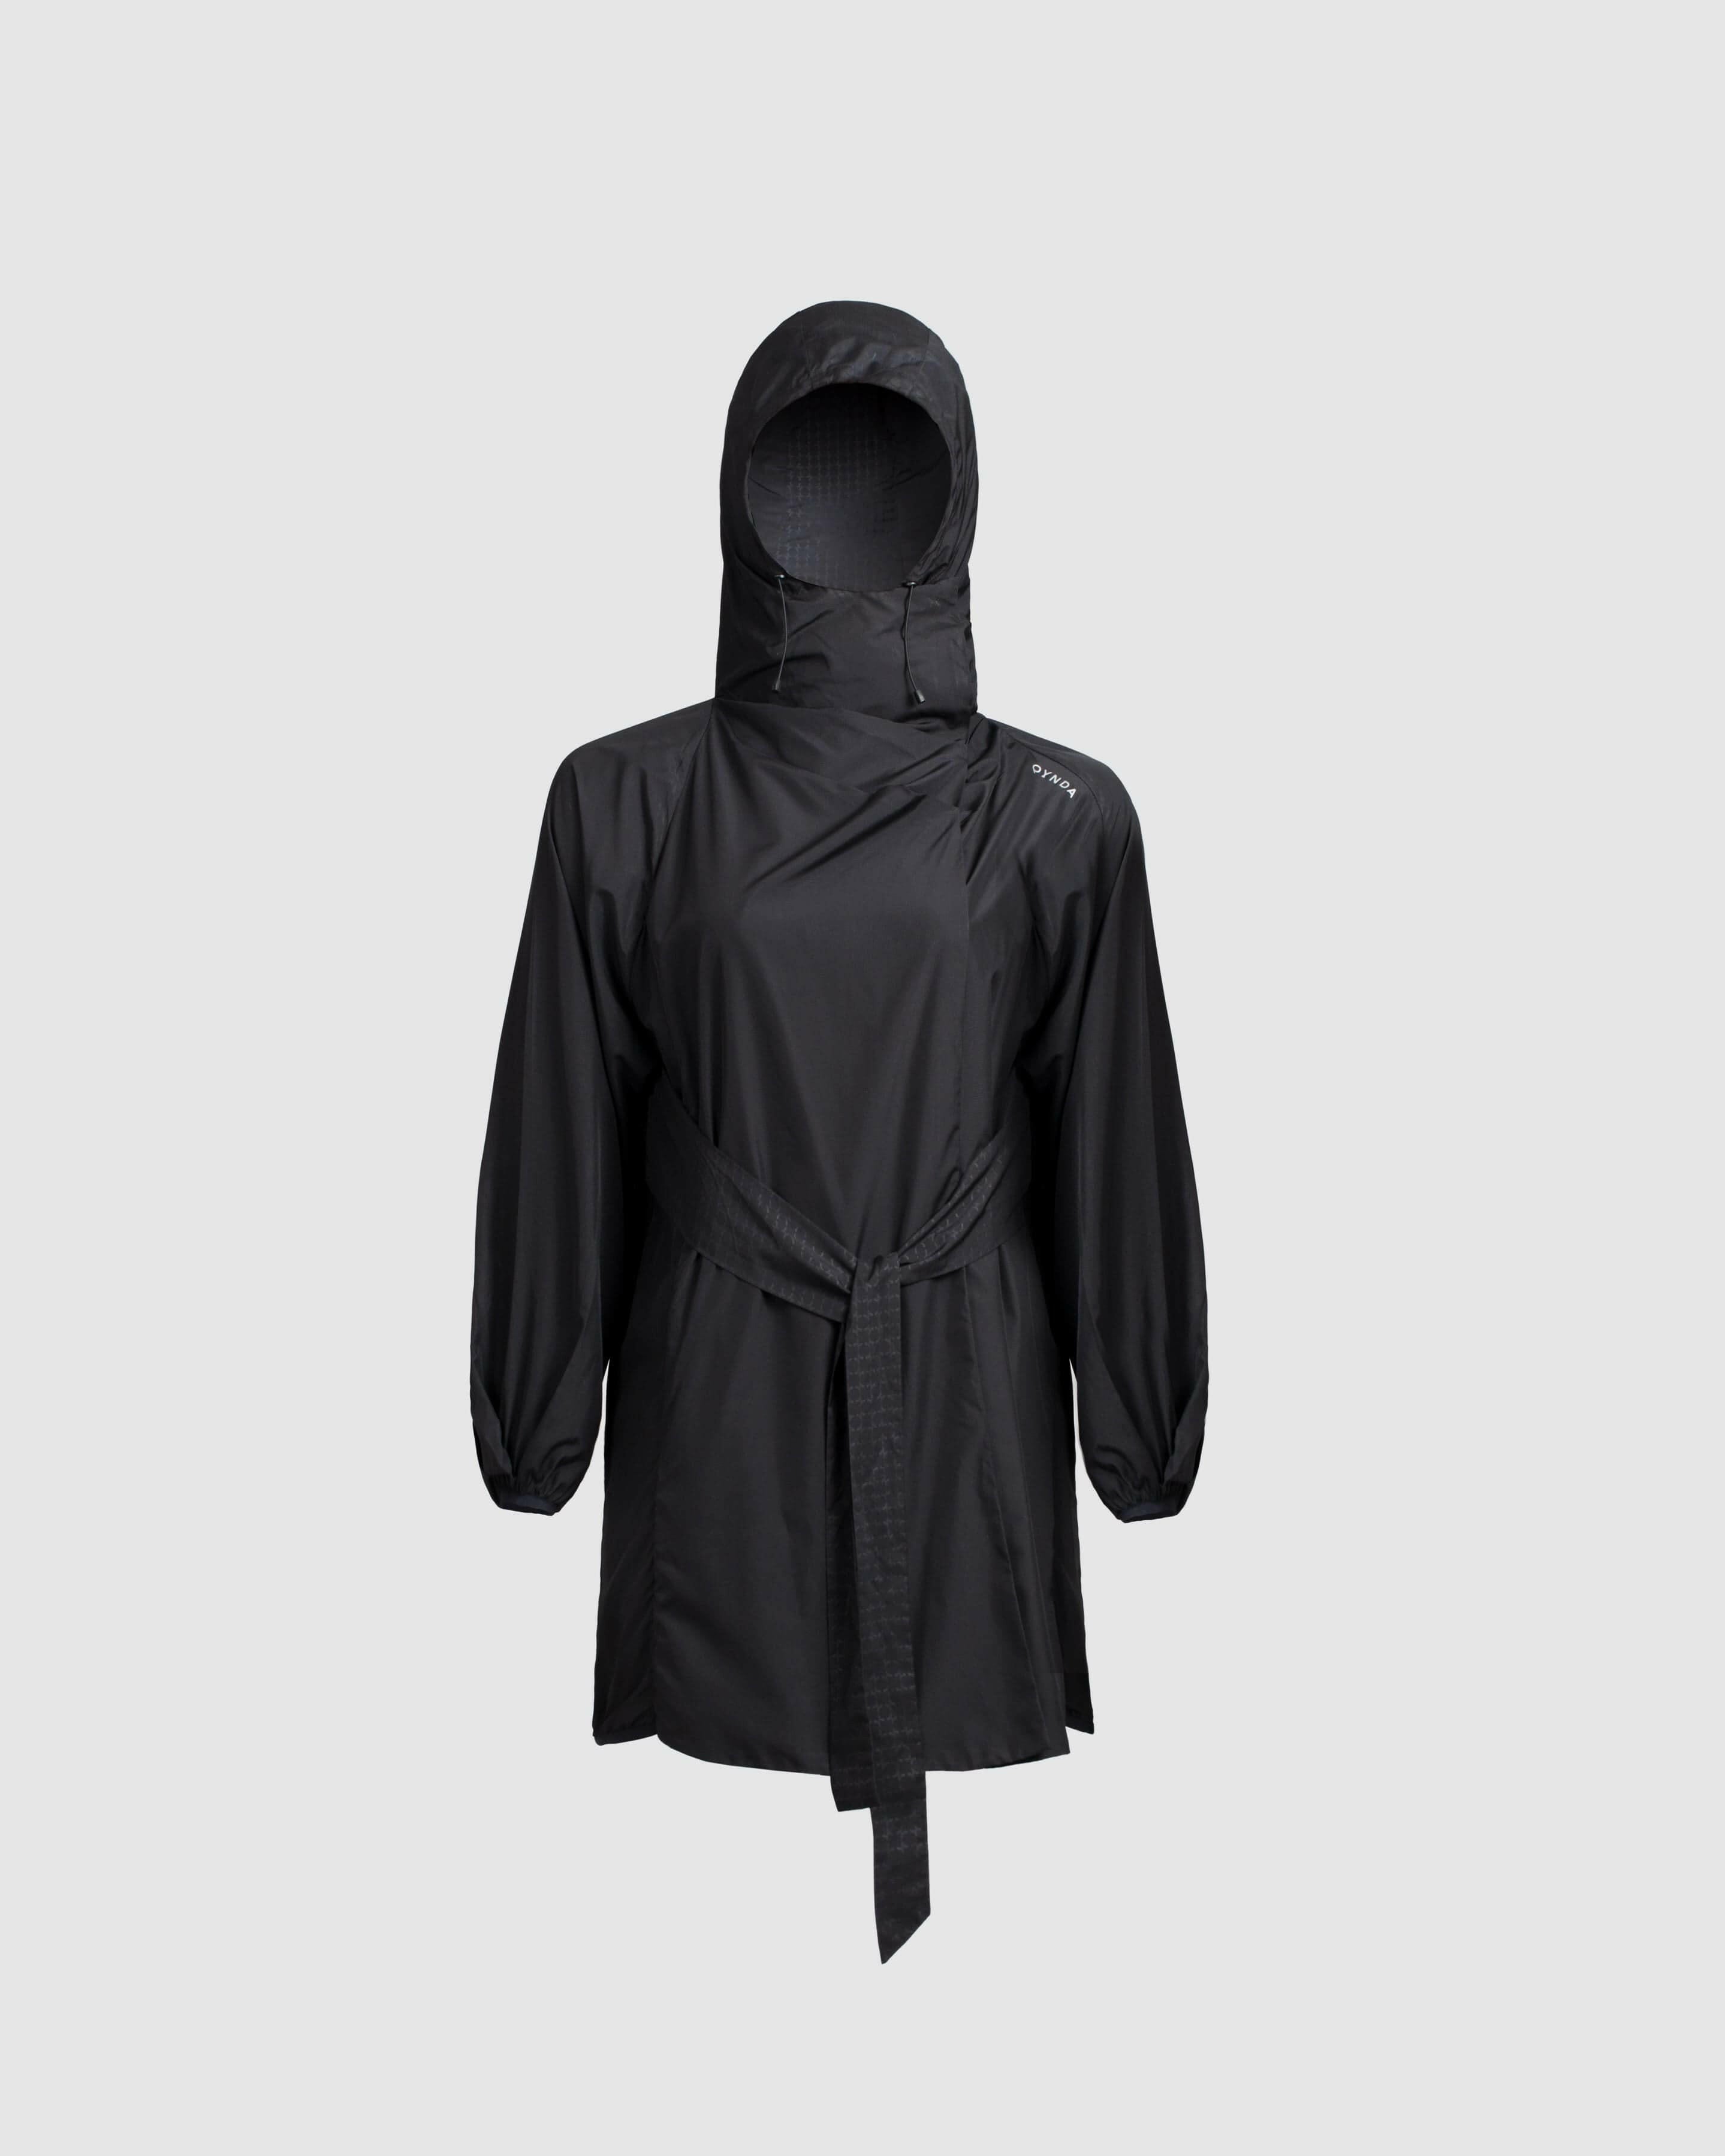 A lightweight black COOLDOWN coat by Qynda with a hood, displayed against a neutral background.